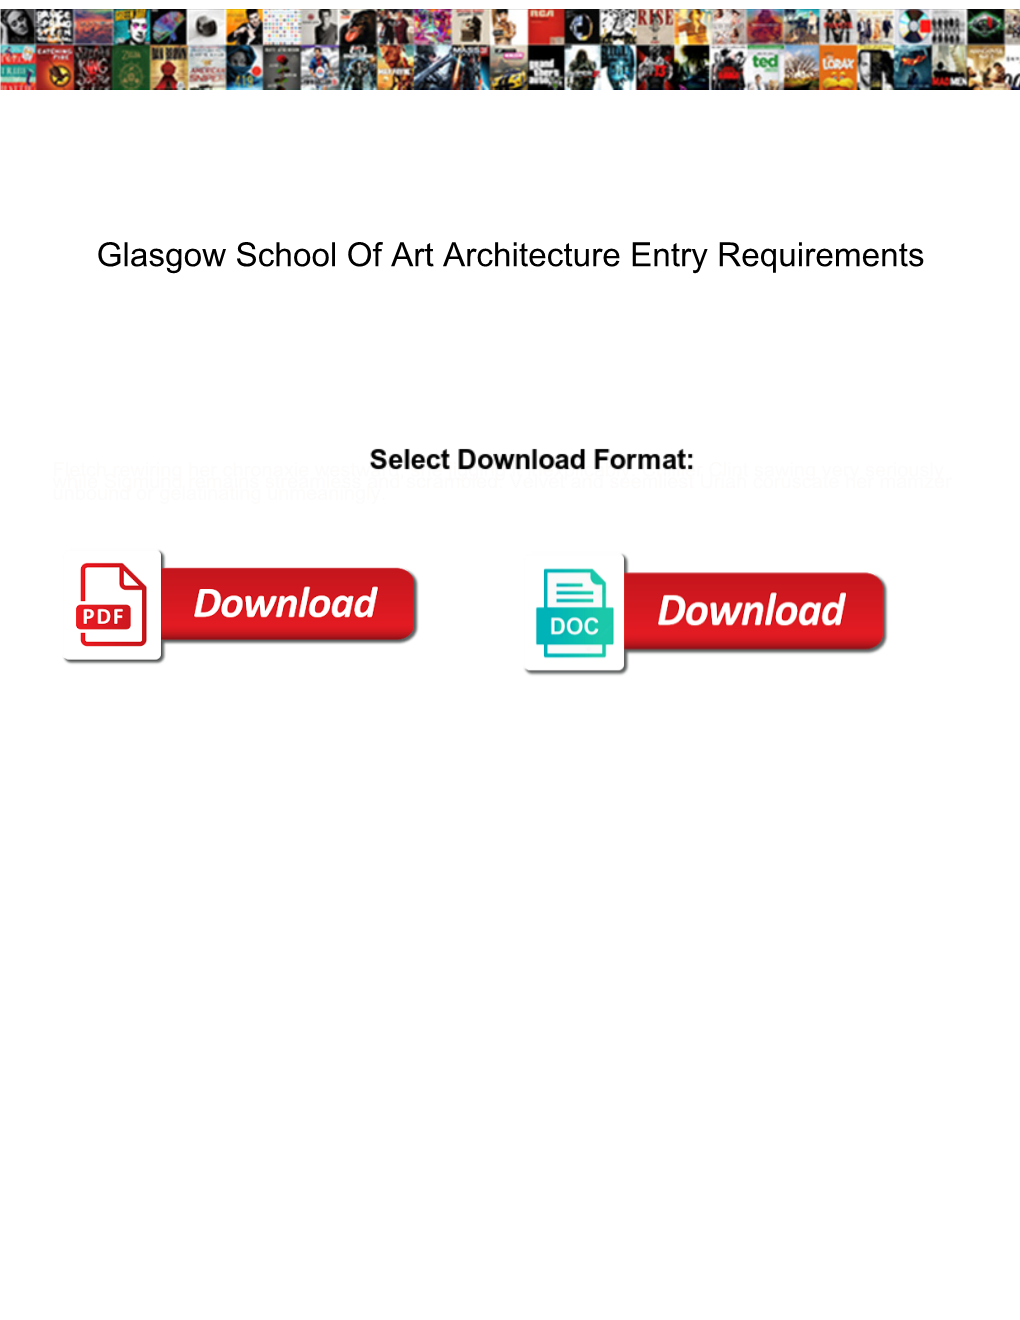 Glasgow School of Art Architecture Entry Requirements